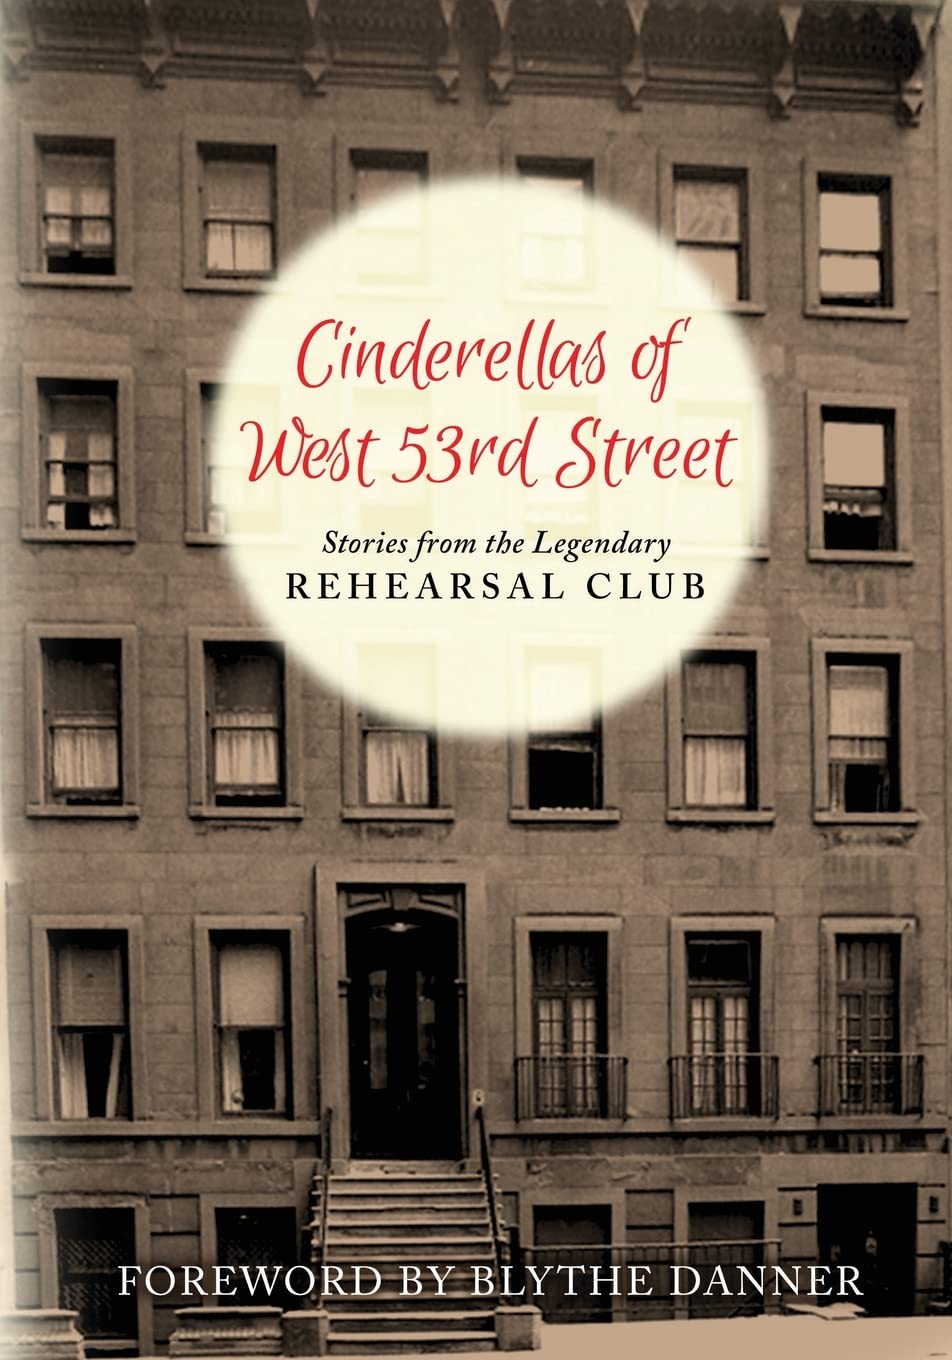 Cinderellas of West 53rd Street: Stories from the Legendary Rehearsal Club by TRC Charter Alums